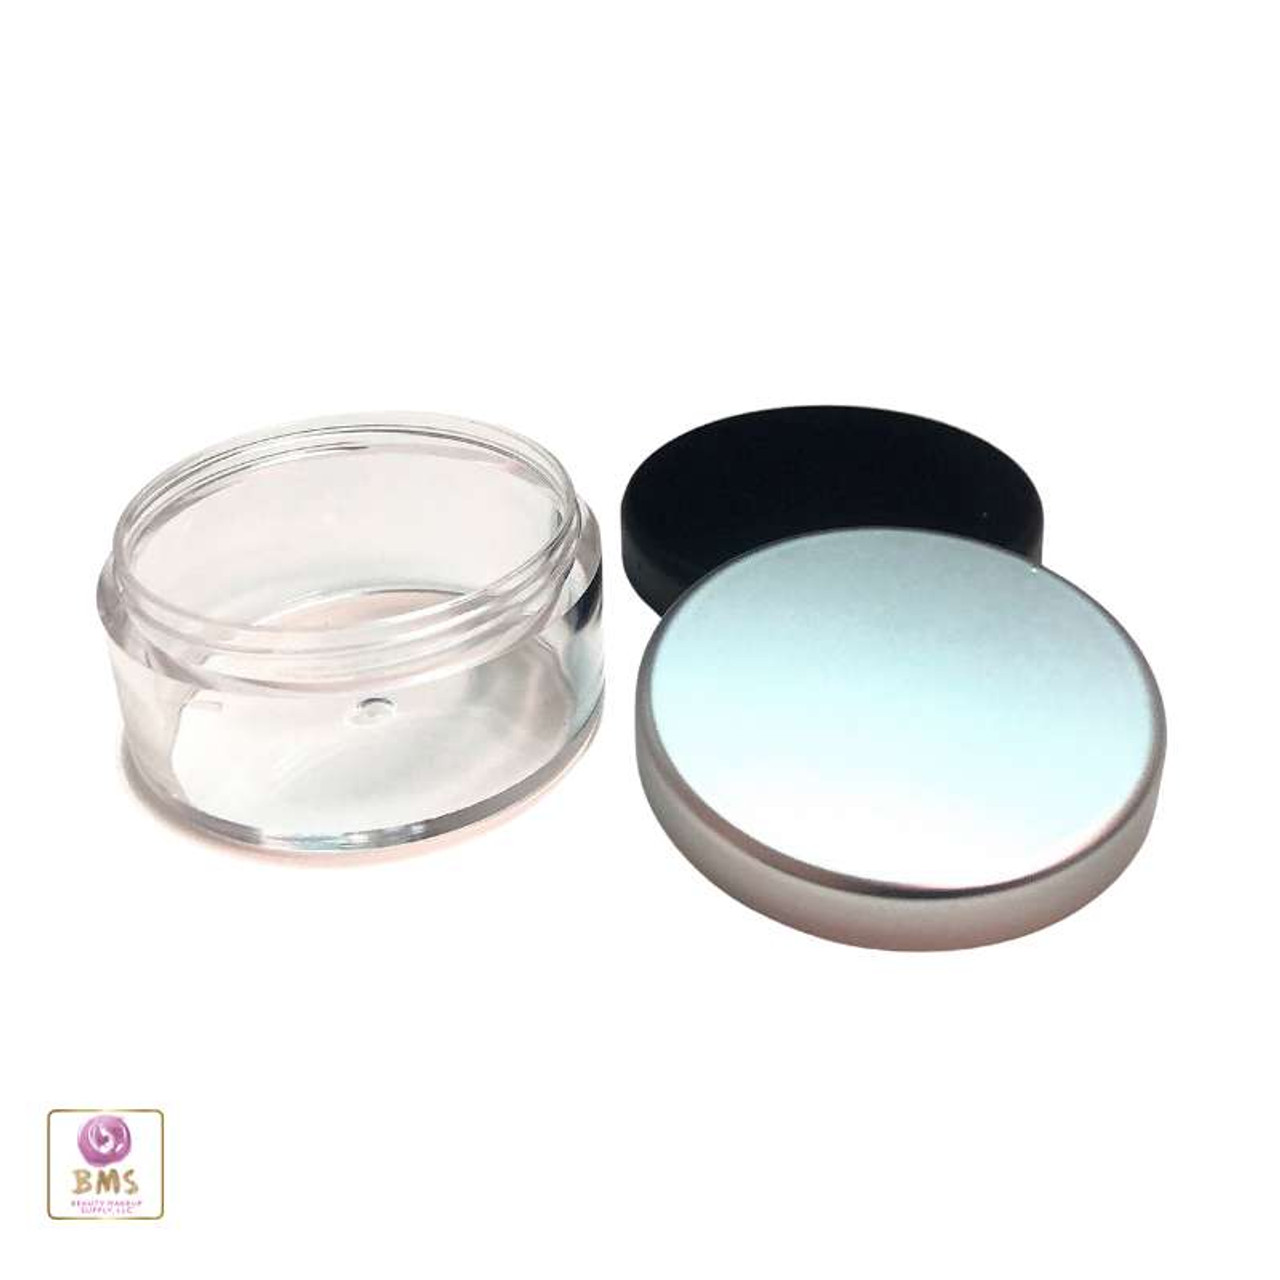 https://cdn11.bigcommerce.com/s-qd7k5gxi/images/stencil/1280x1280/products/438/6951/Cosmetic-Sifter-Jars-Plastic-Beauty-Containers-with-Lids-30-Gram-Matte-Black-Silver-Lid-3073-3035-Beauty-Makeup-Supply_6112__73005.1661390023.jpg?c=2